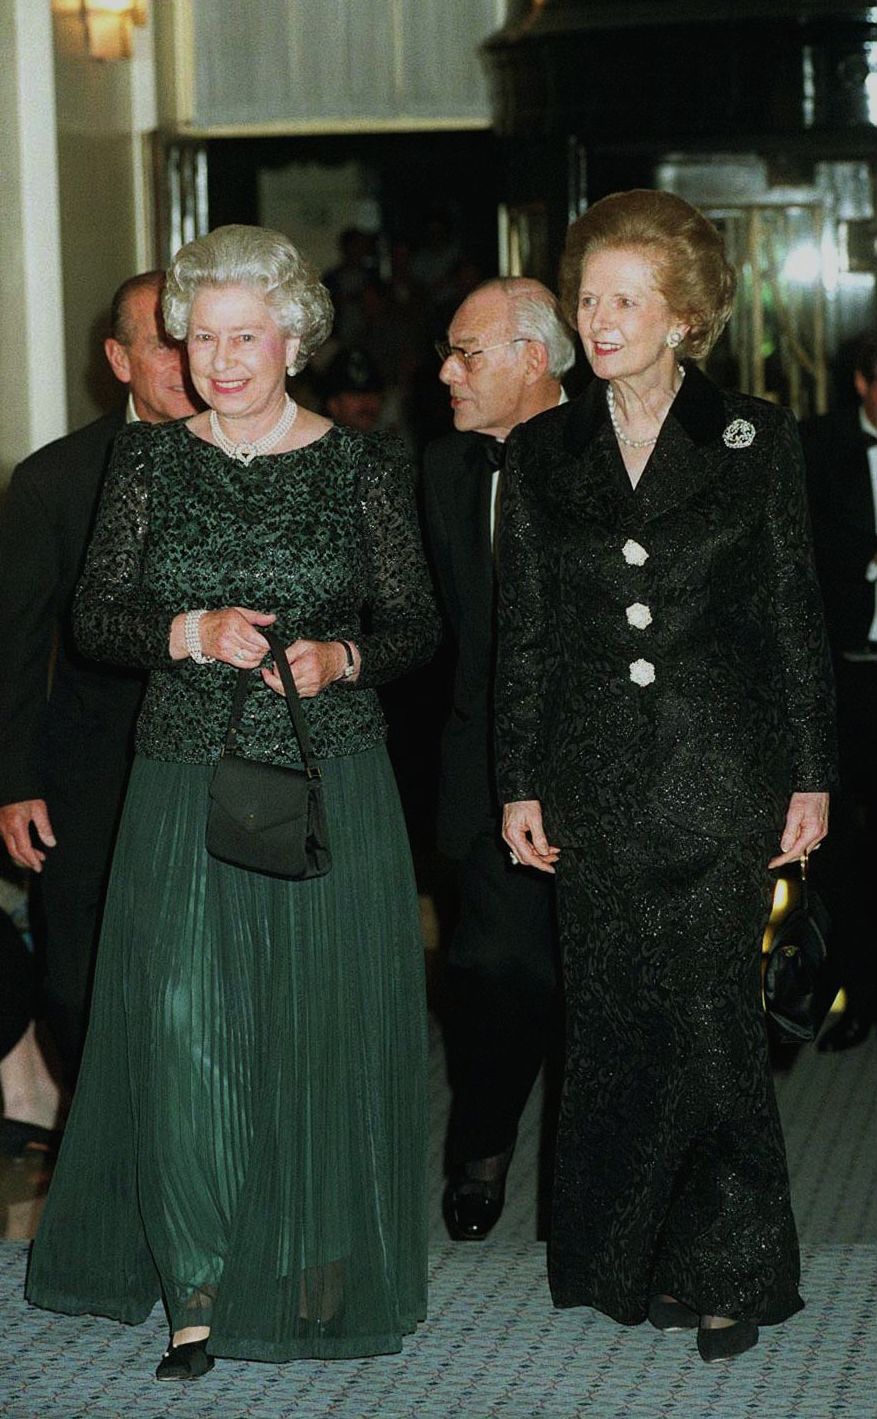 Queen Elizabeth II and Margaret Thatcher at the prime minister's 70th birthday celebration, October 16, 1995